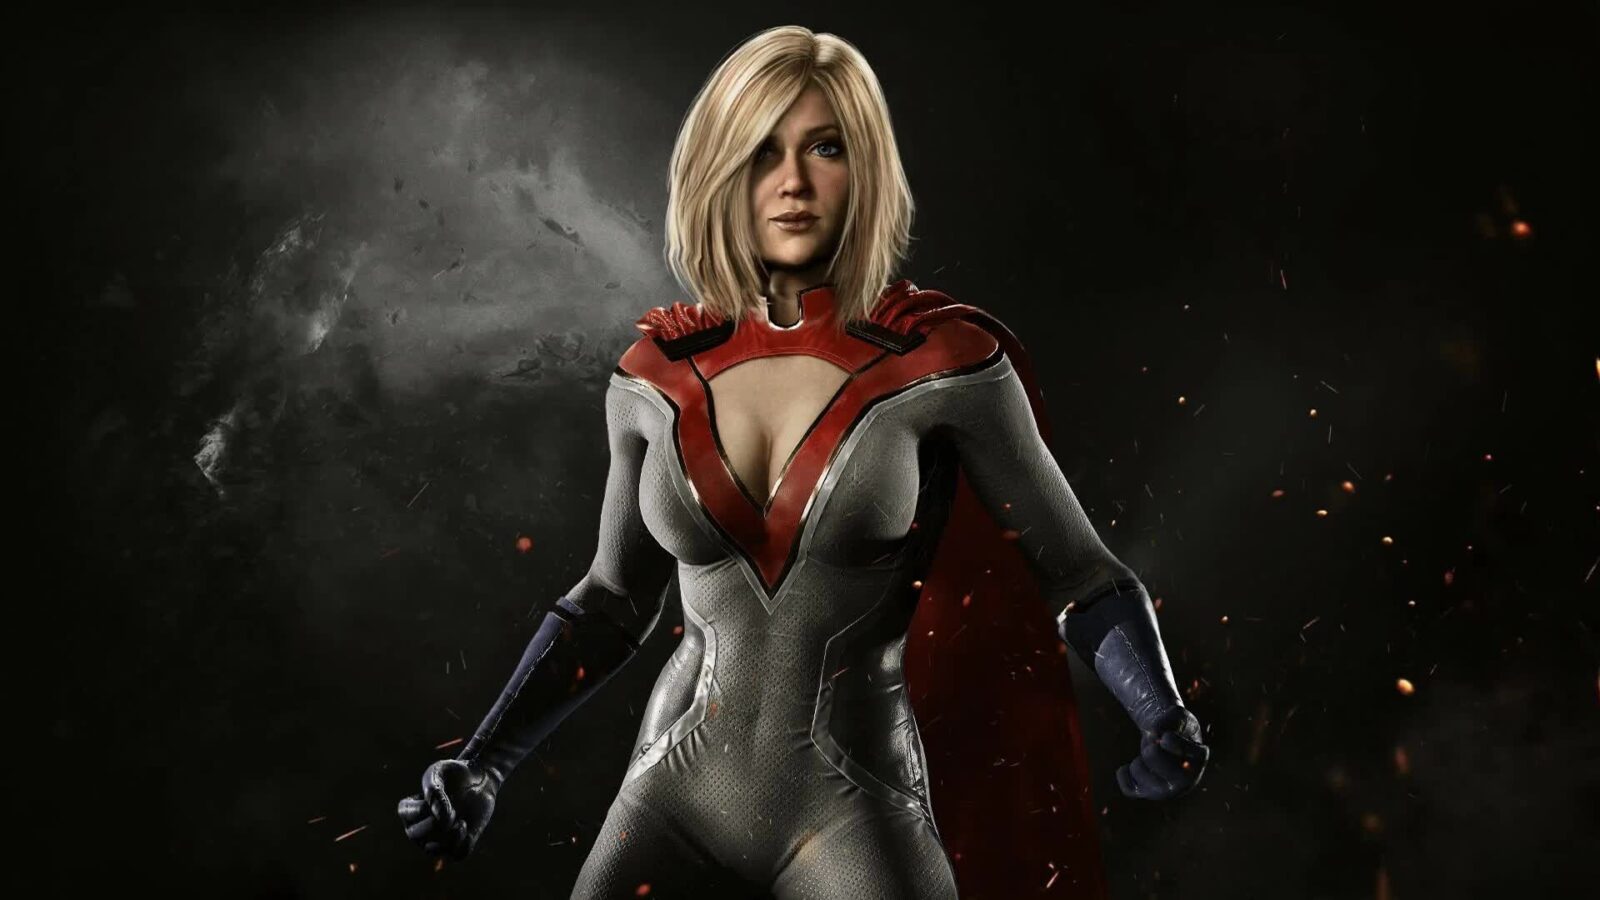 Power Girl Injustice 2 Game - Free Live Wallpaper